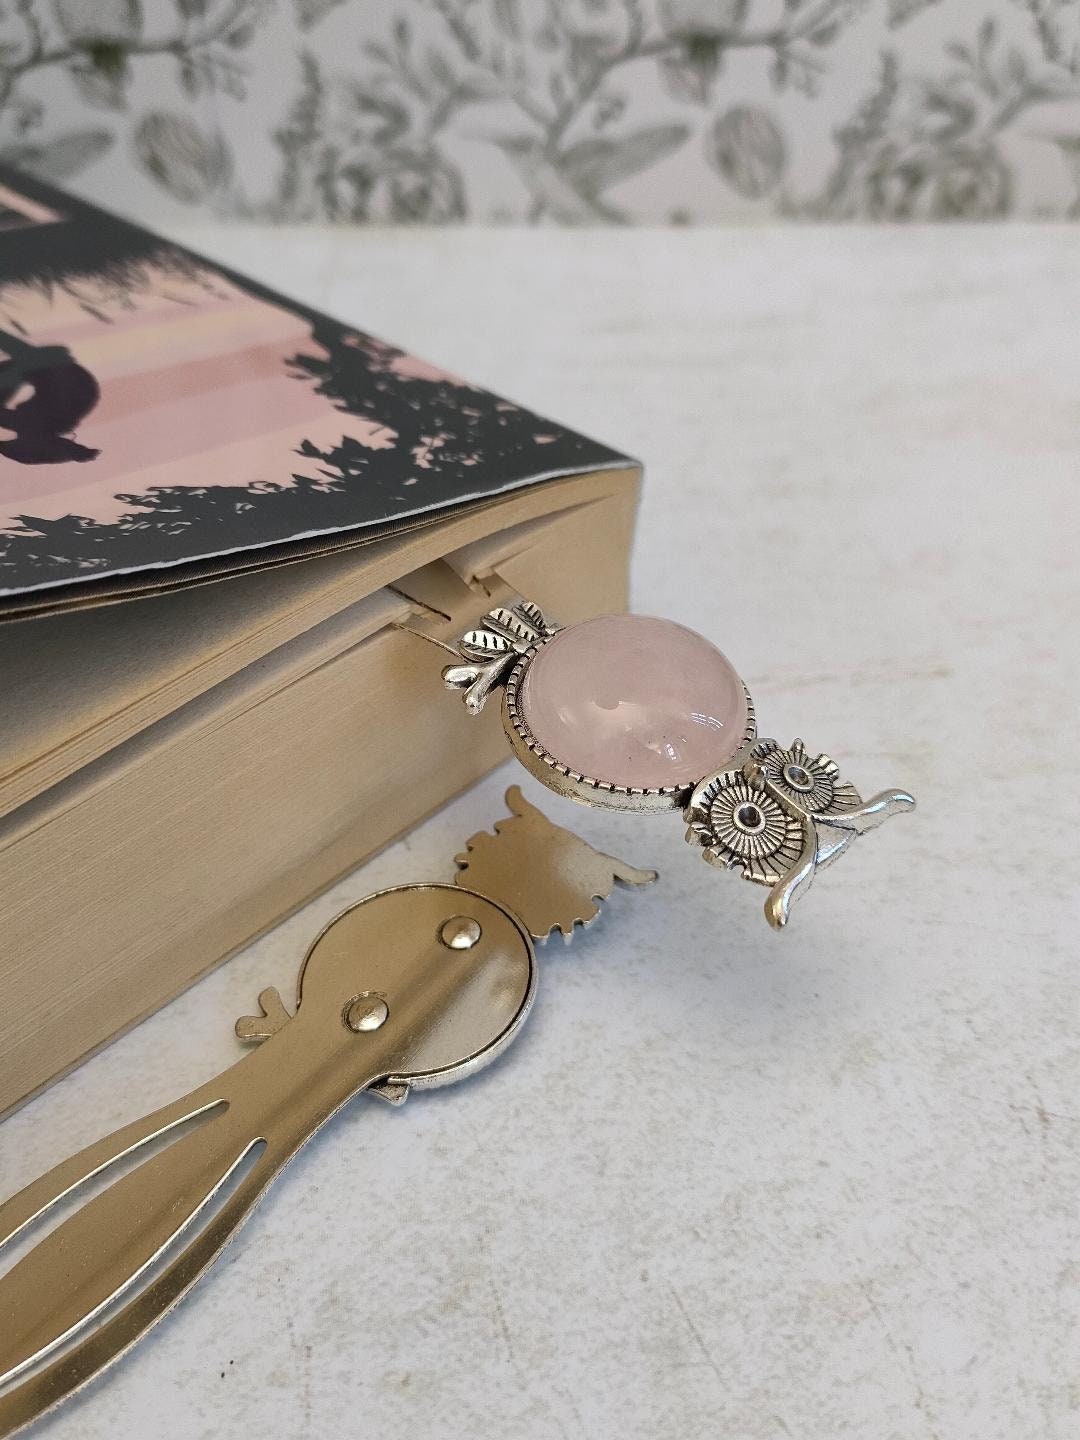 Vintage Owl Antique Silver Tibetan Style Alloy Bookmarks, Natural Rose Quartz Bookmarker, Gift for Book Lovers, Reading Accessories